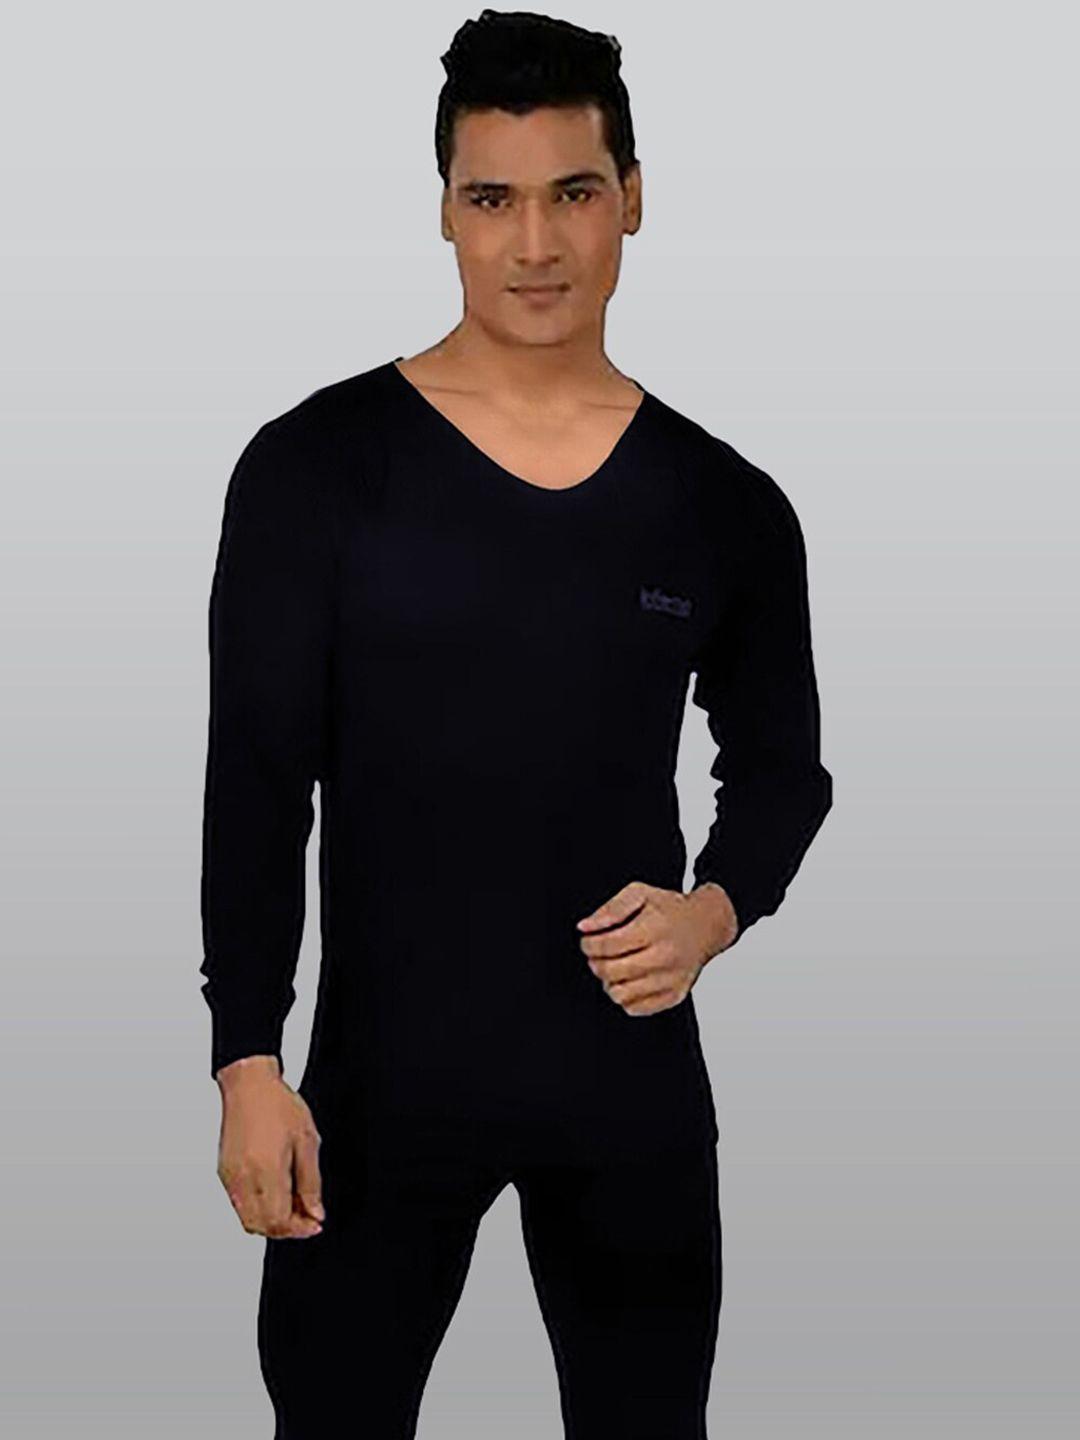 inferno cotton thermal tops